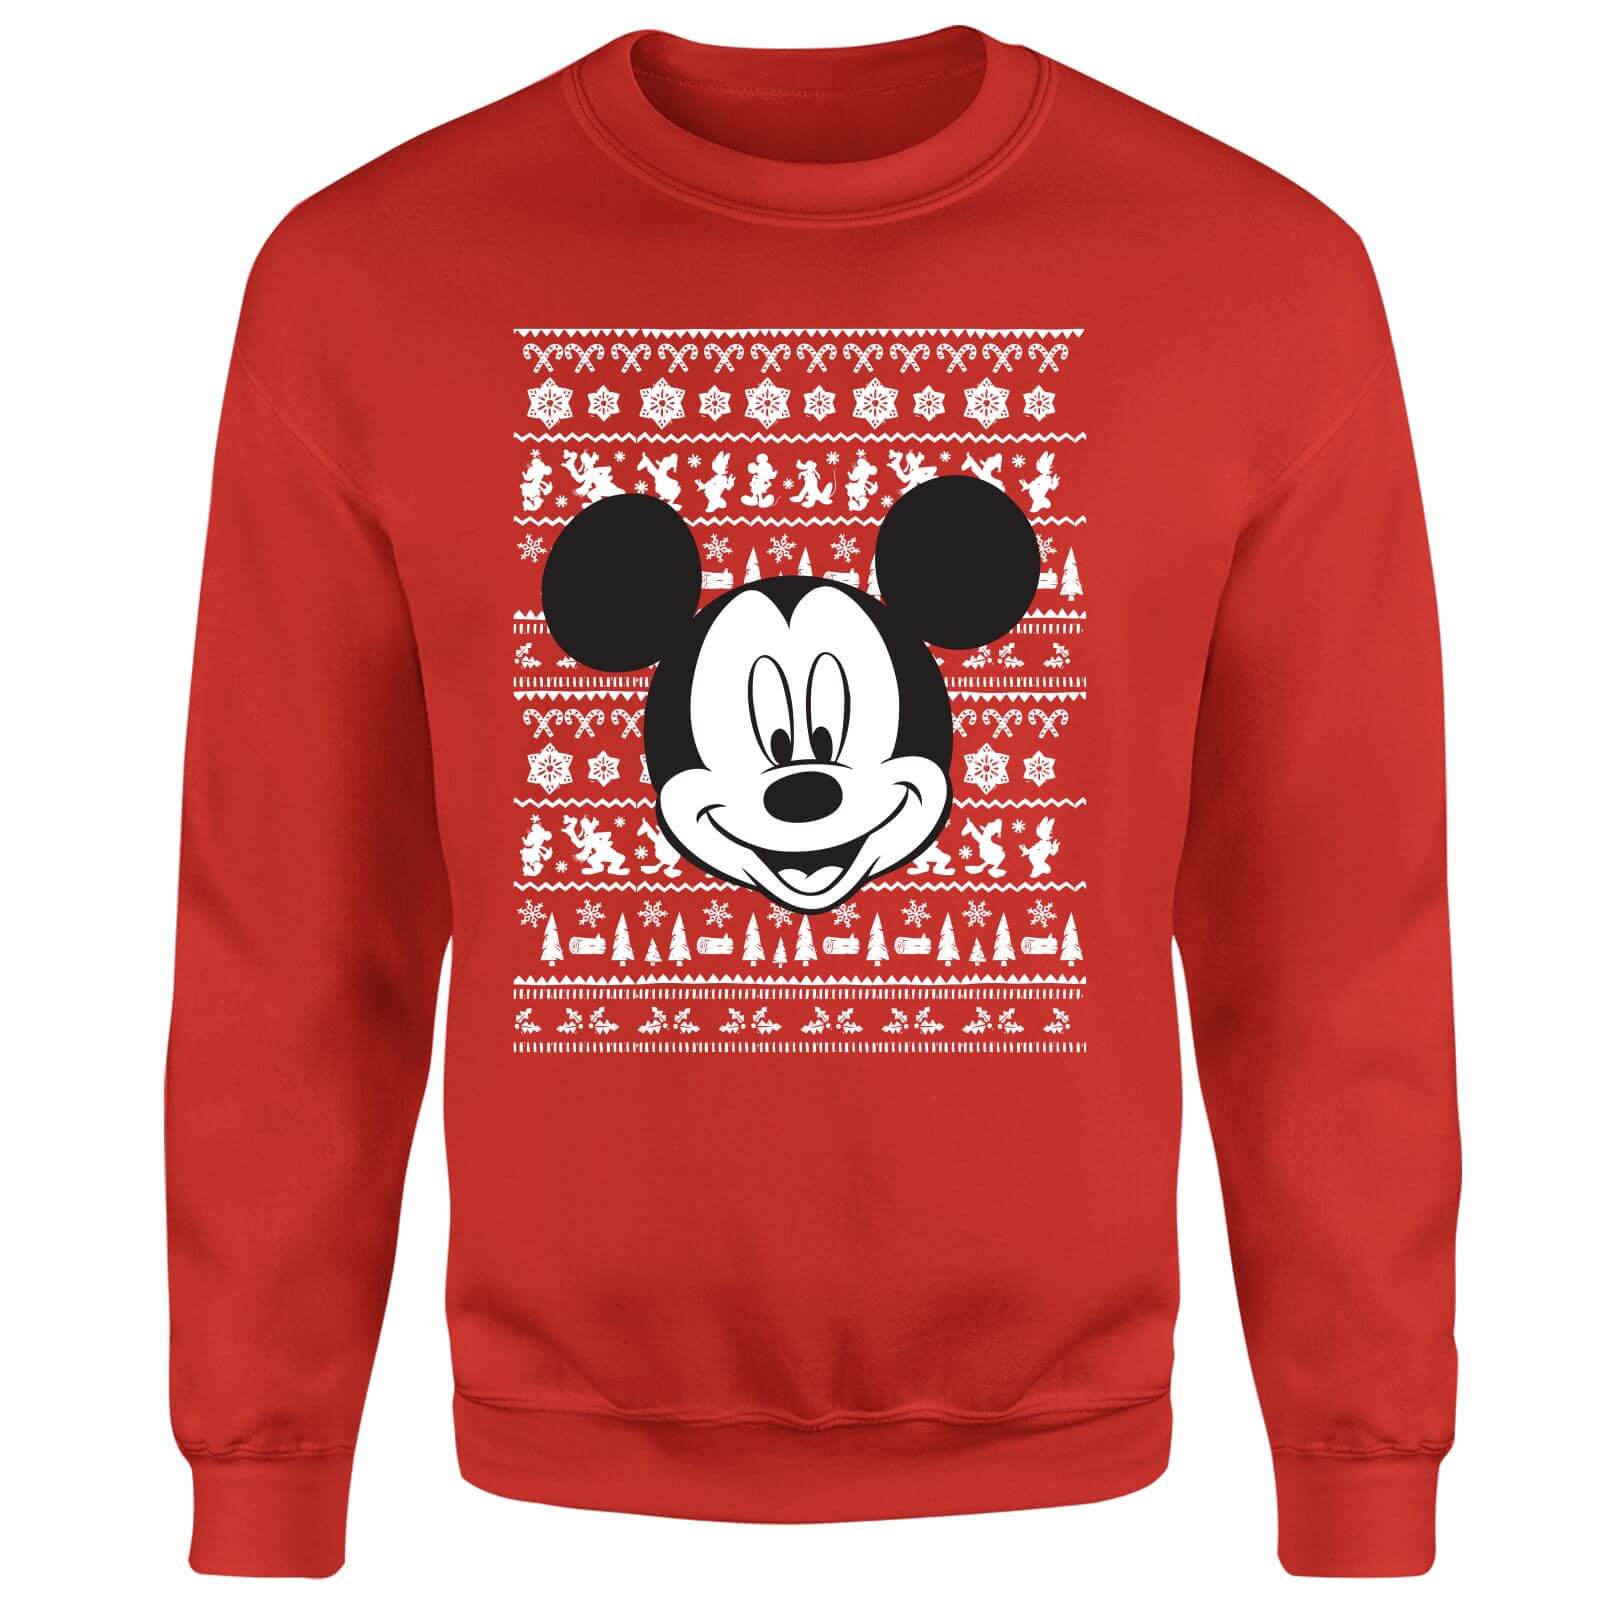 Disney Mickey Mouse Christmas Mickey Face Red Christmas Jumper - M